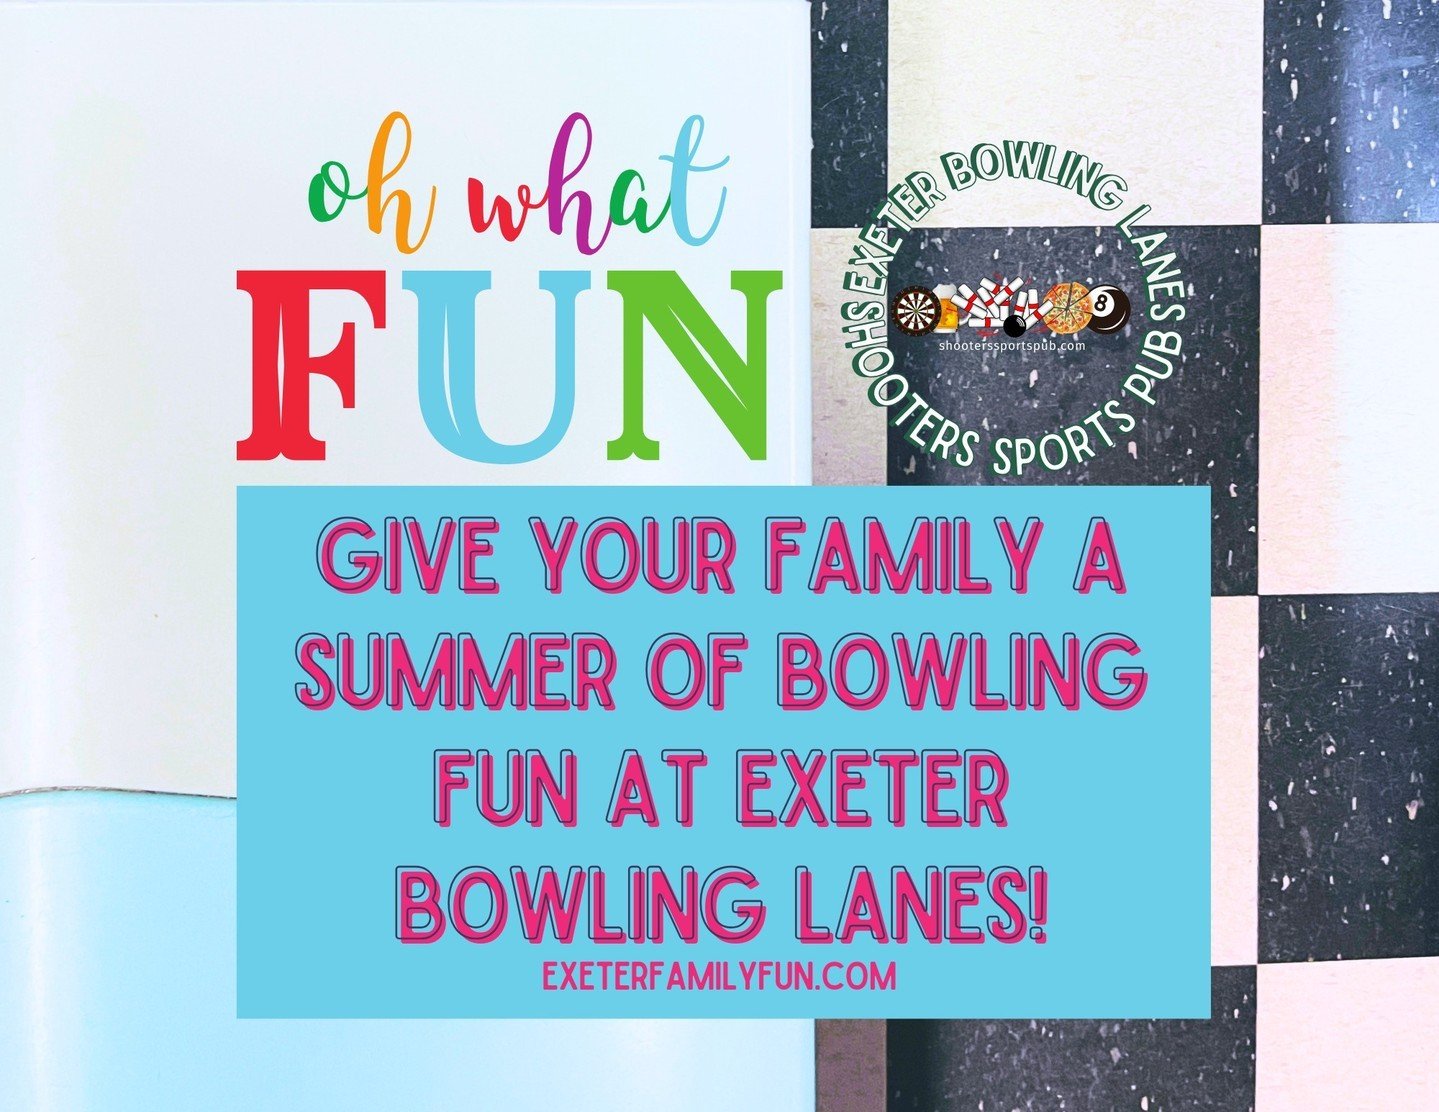 🌞🎳 Last call to roll into summer fun! ⁠
⁠
Our Summer Bowling Pass Special ends TOMORROW! Don't miss out on endless strikes and family memories. ⁠
⁠
Grab yours and let's get rolling! ⁠
⁠
#SummerBowlingPass #StrikeSeason ⁠
#LastChance 🎳✨⁠
⁠
exeterfa